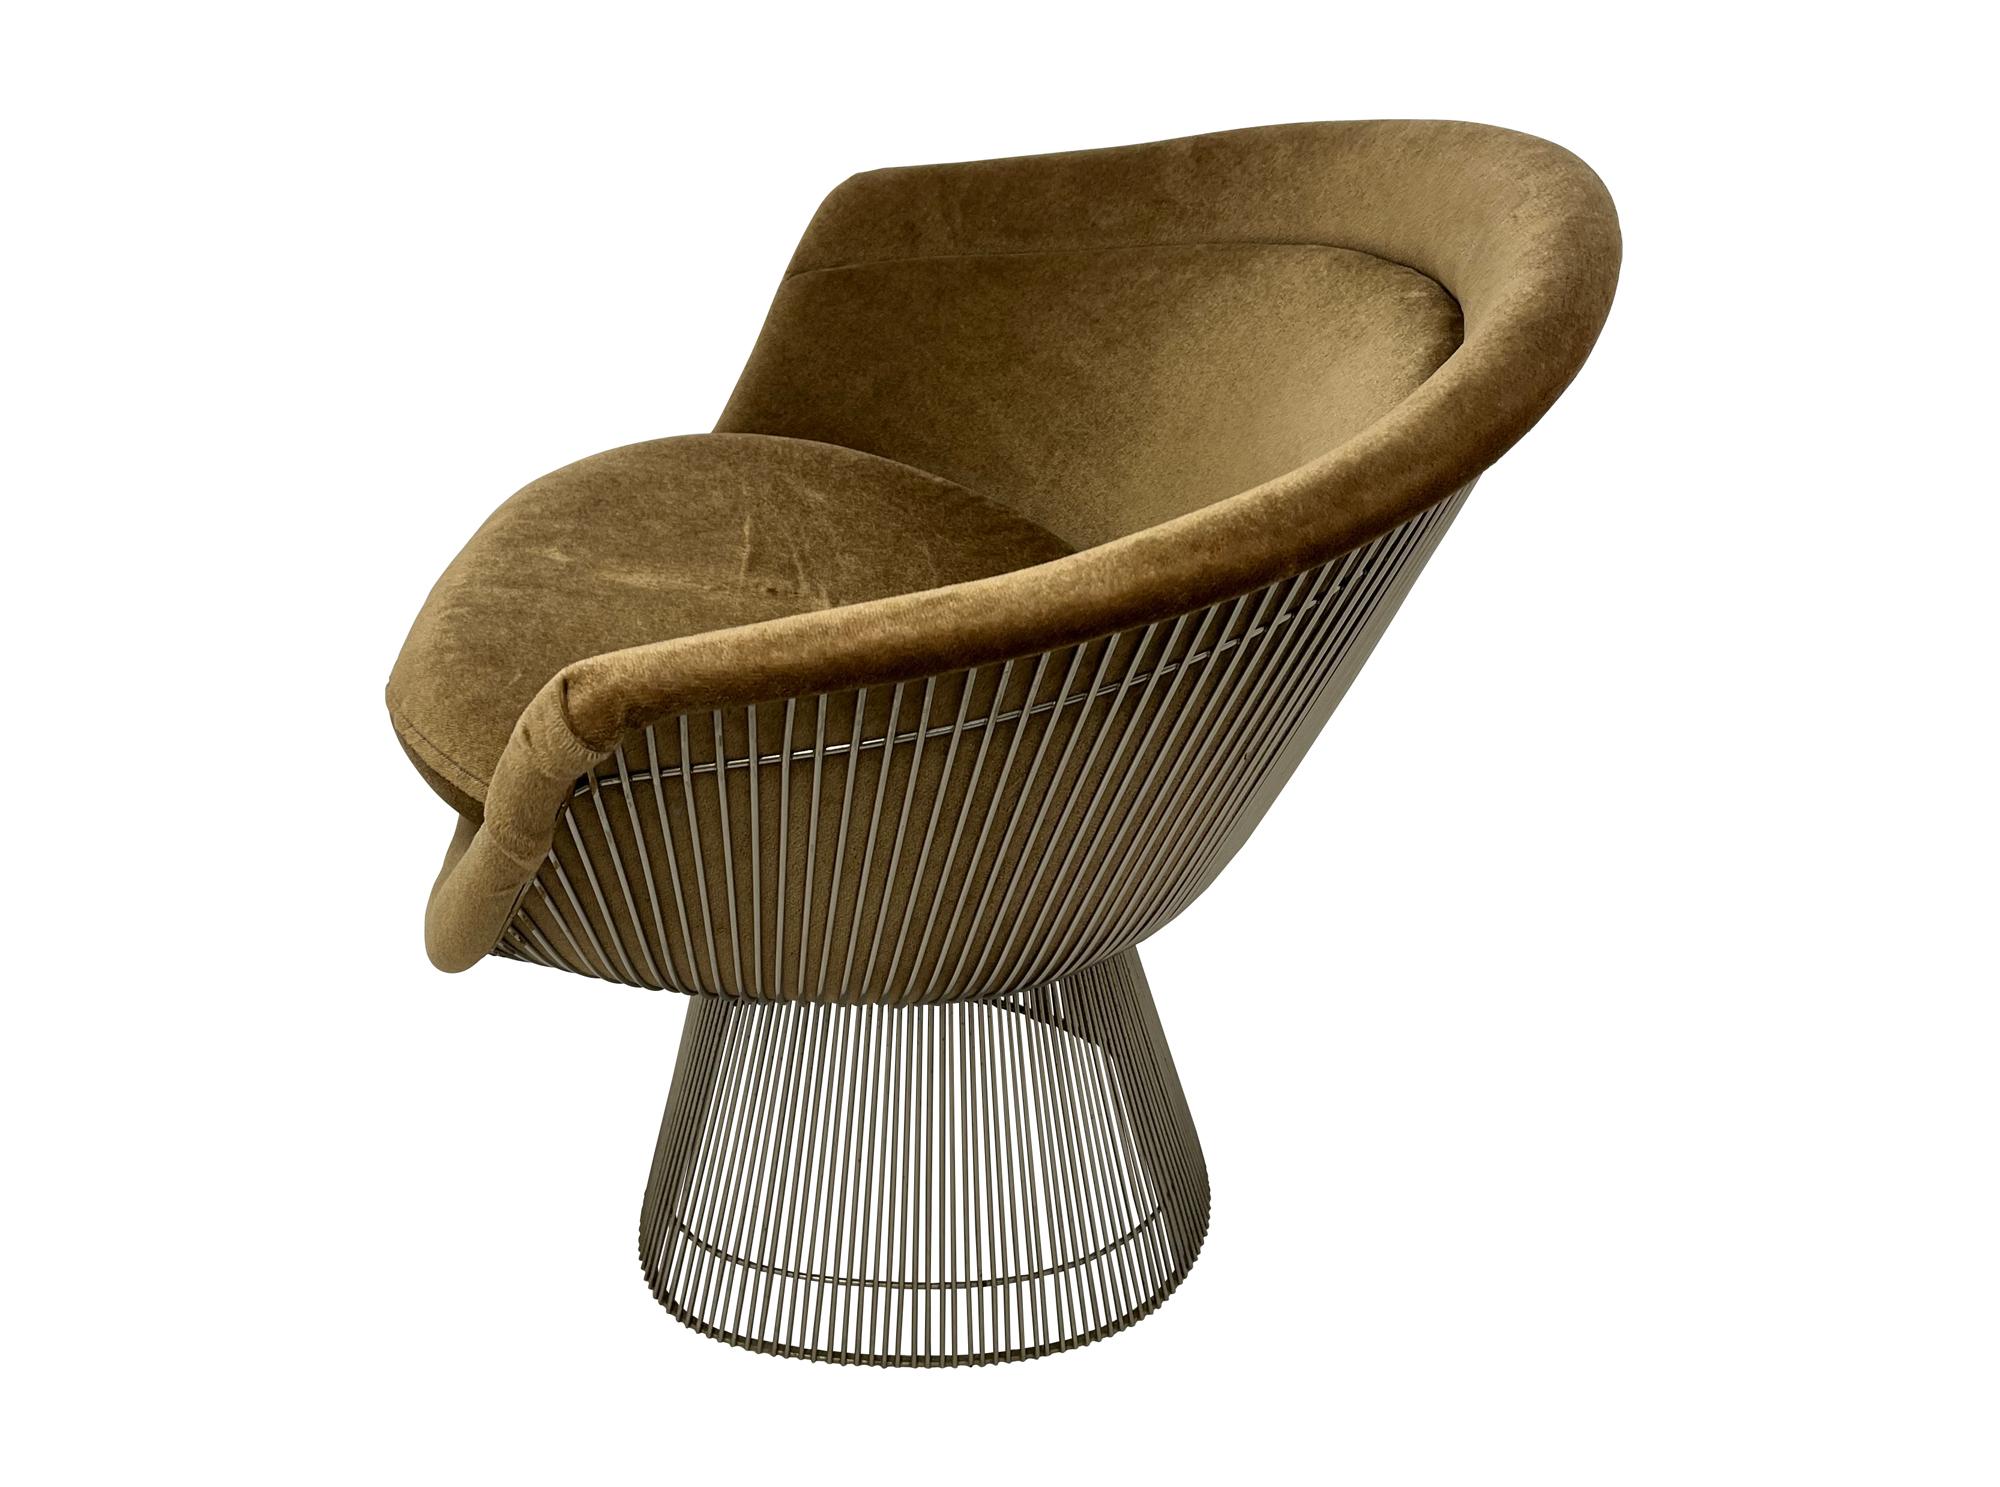 The elegant chairs and ottoman are early production. It is rare to find these many pieces. They are a classic example of classic modern design.

Warren Platner (June 18, 1919 – April 17, 2006) was an American architect and interior